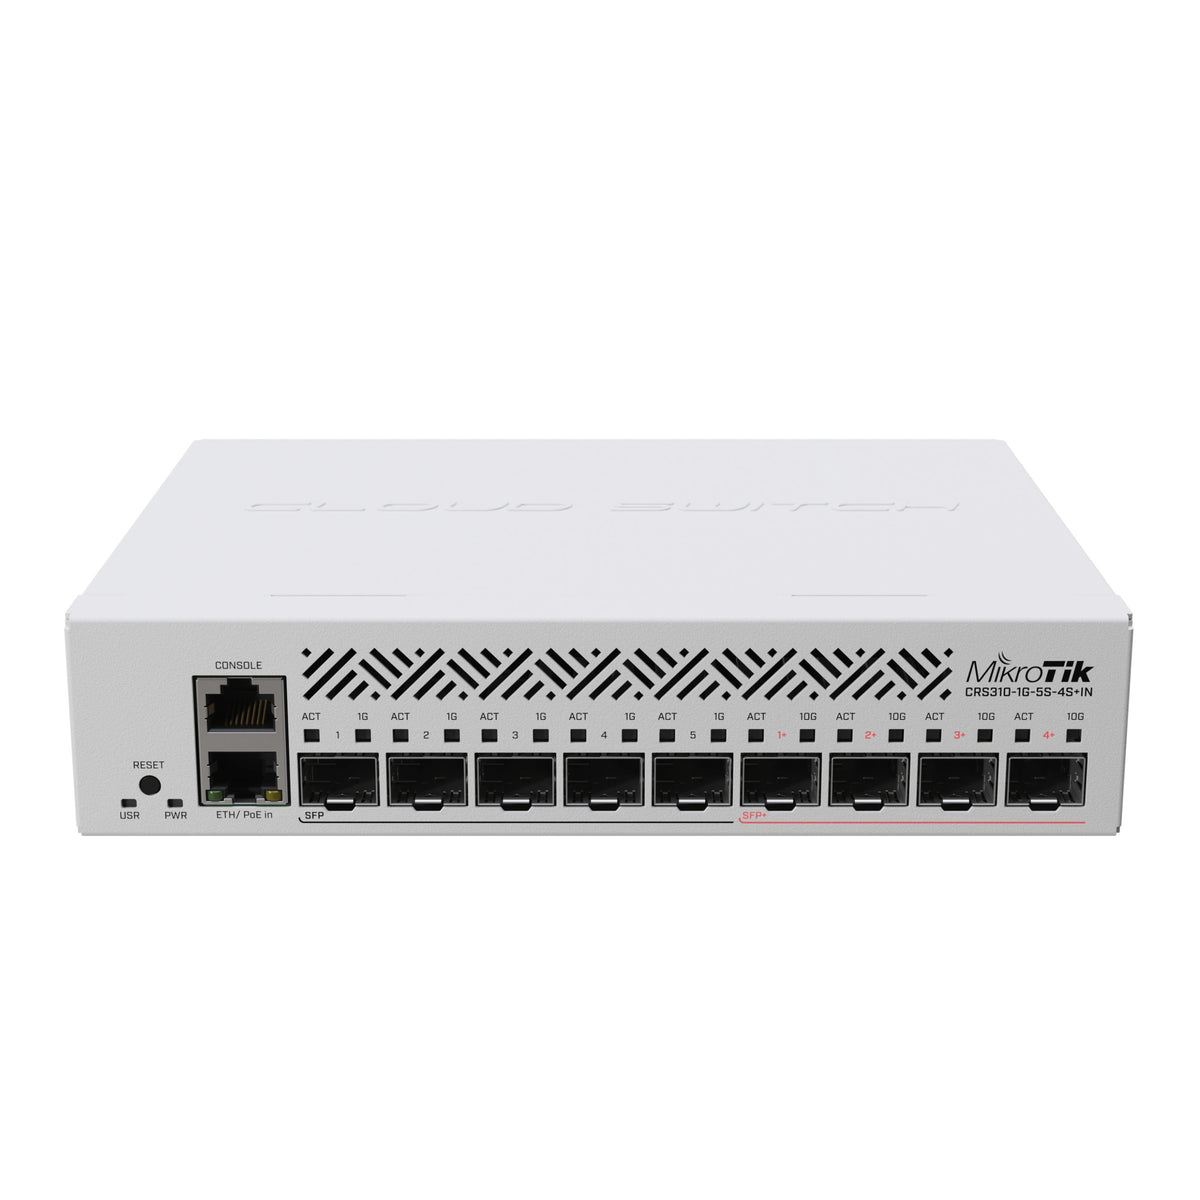 2.5/10 Gigabit Combo Cloud Router Switch - CRS310-8G+2S+IN